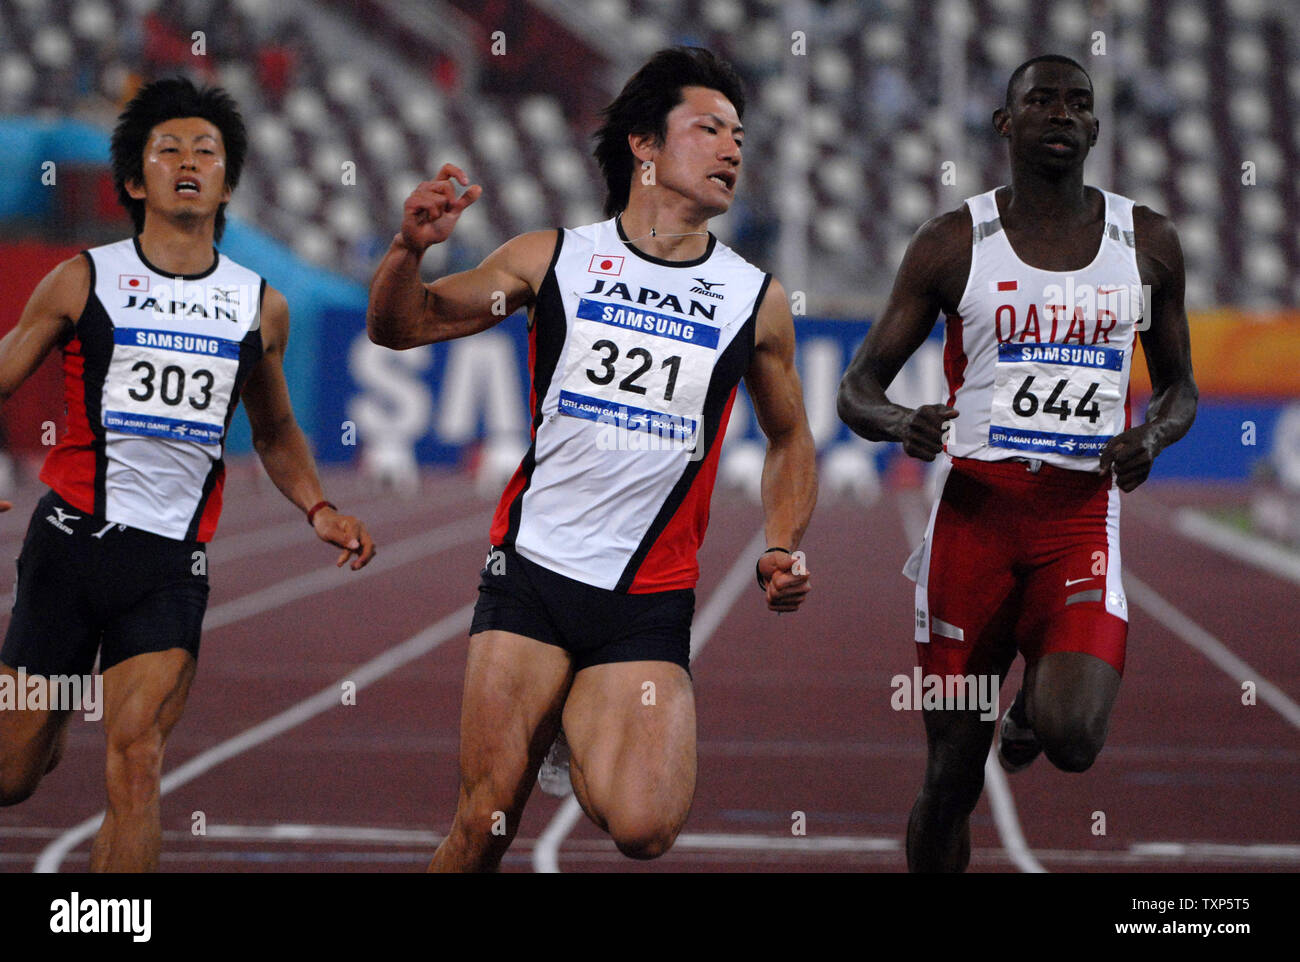 Japan's Naoki Tsukahara (center) wins the silvermedal in the men's 100 meters at the 15th Asian Games in Doha Qatar, Saturday December 9, 2006.  Saudia Arabia's Yahya Hassan Habeeb medal and Thailands' Wachara Sondee win's the gold medal. Thirteen thousand athletes from 39 countries are competing in 45 sporting events over two weeks. The games will end on December 15. (UPI Photo/Norbert Schiller) Stock Photo